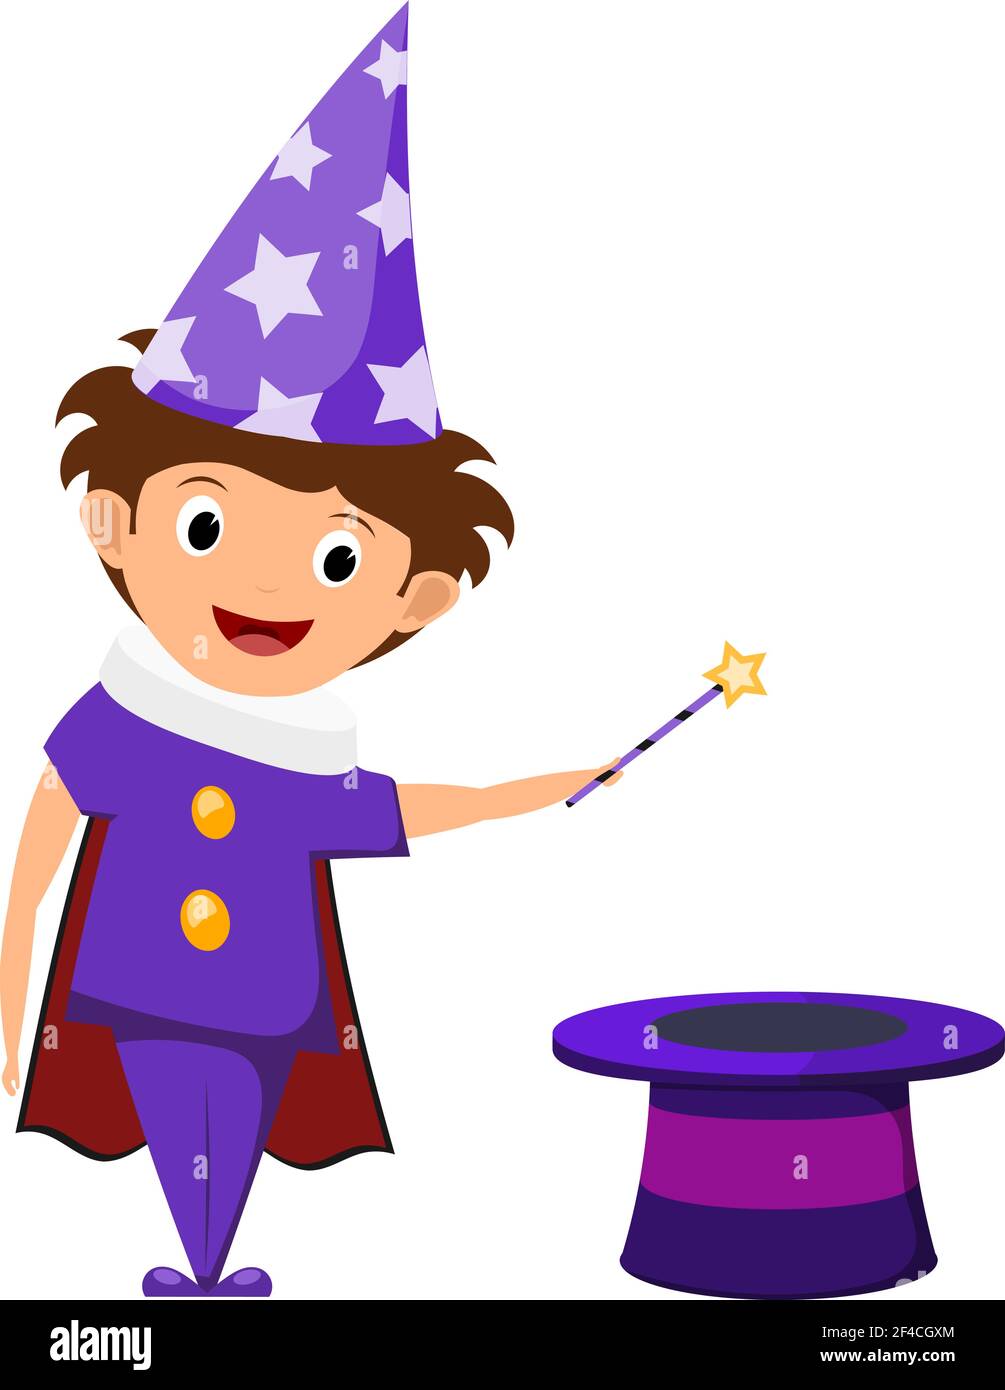 The little magician. A child in a purple suit and cap with stars with a  magic wand in his hands and cylinder. Illustration of children’s  performance, show. Cartoon style. The young actor,